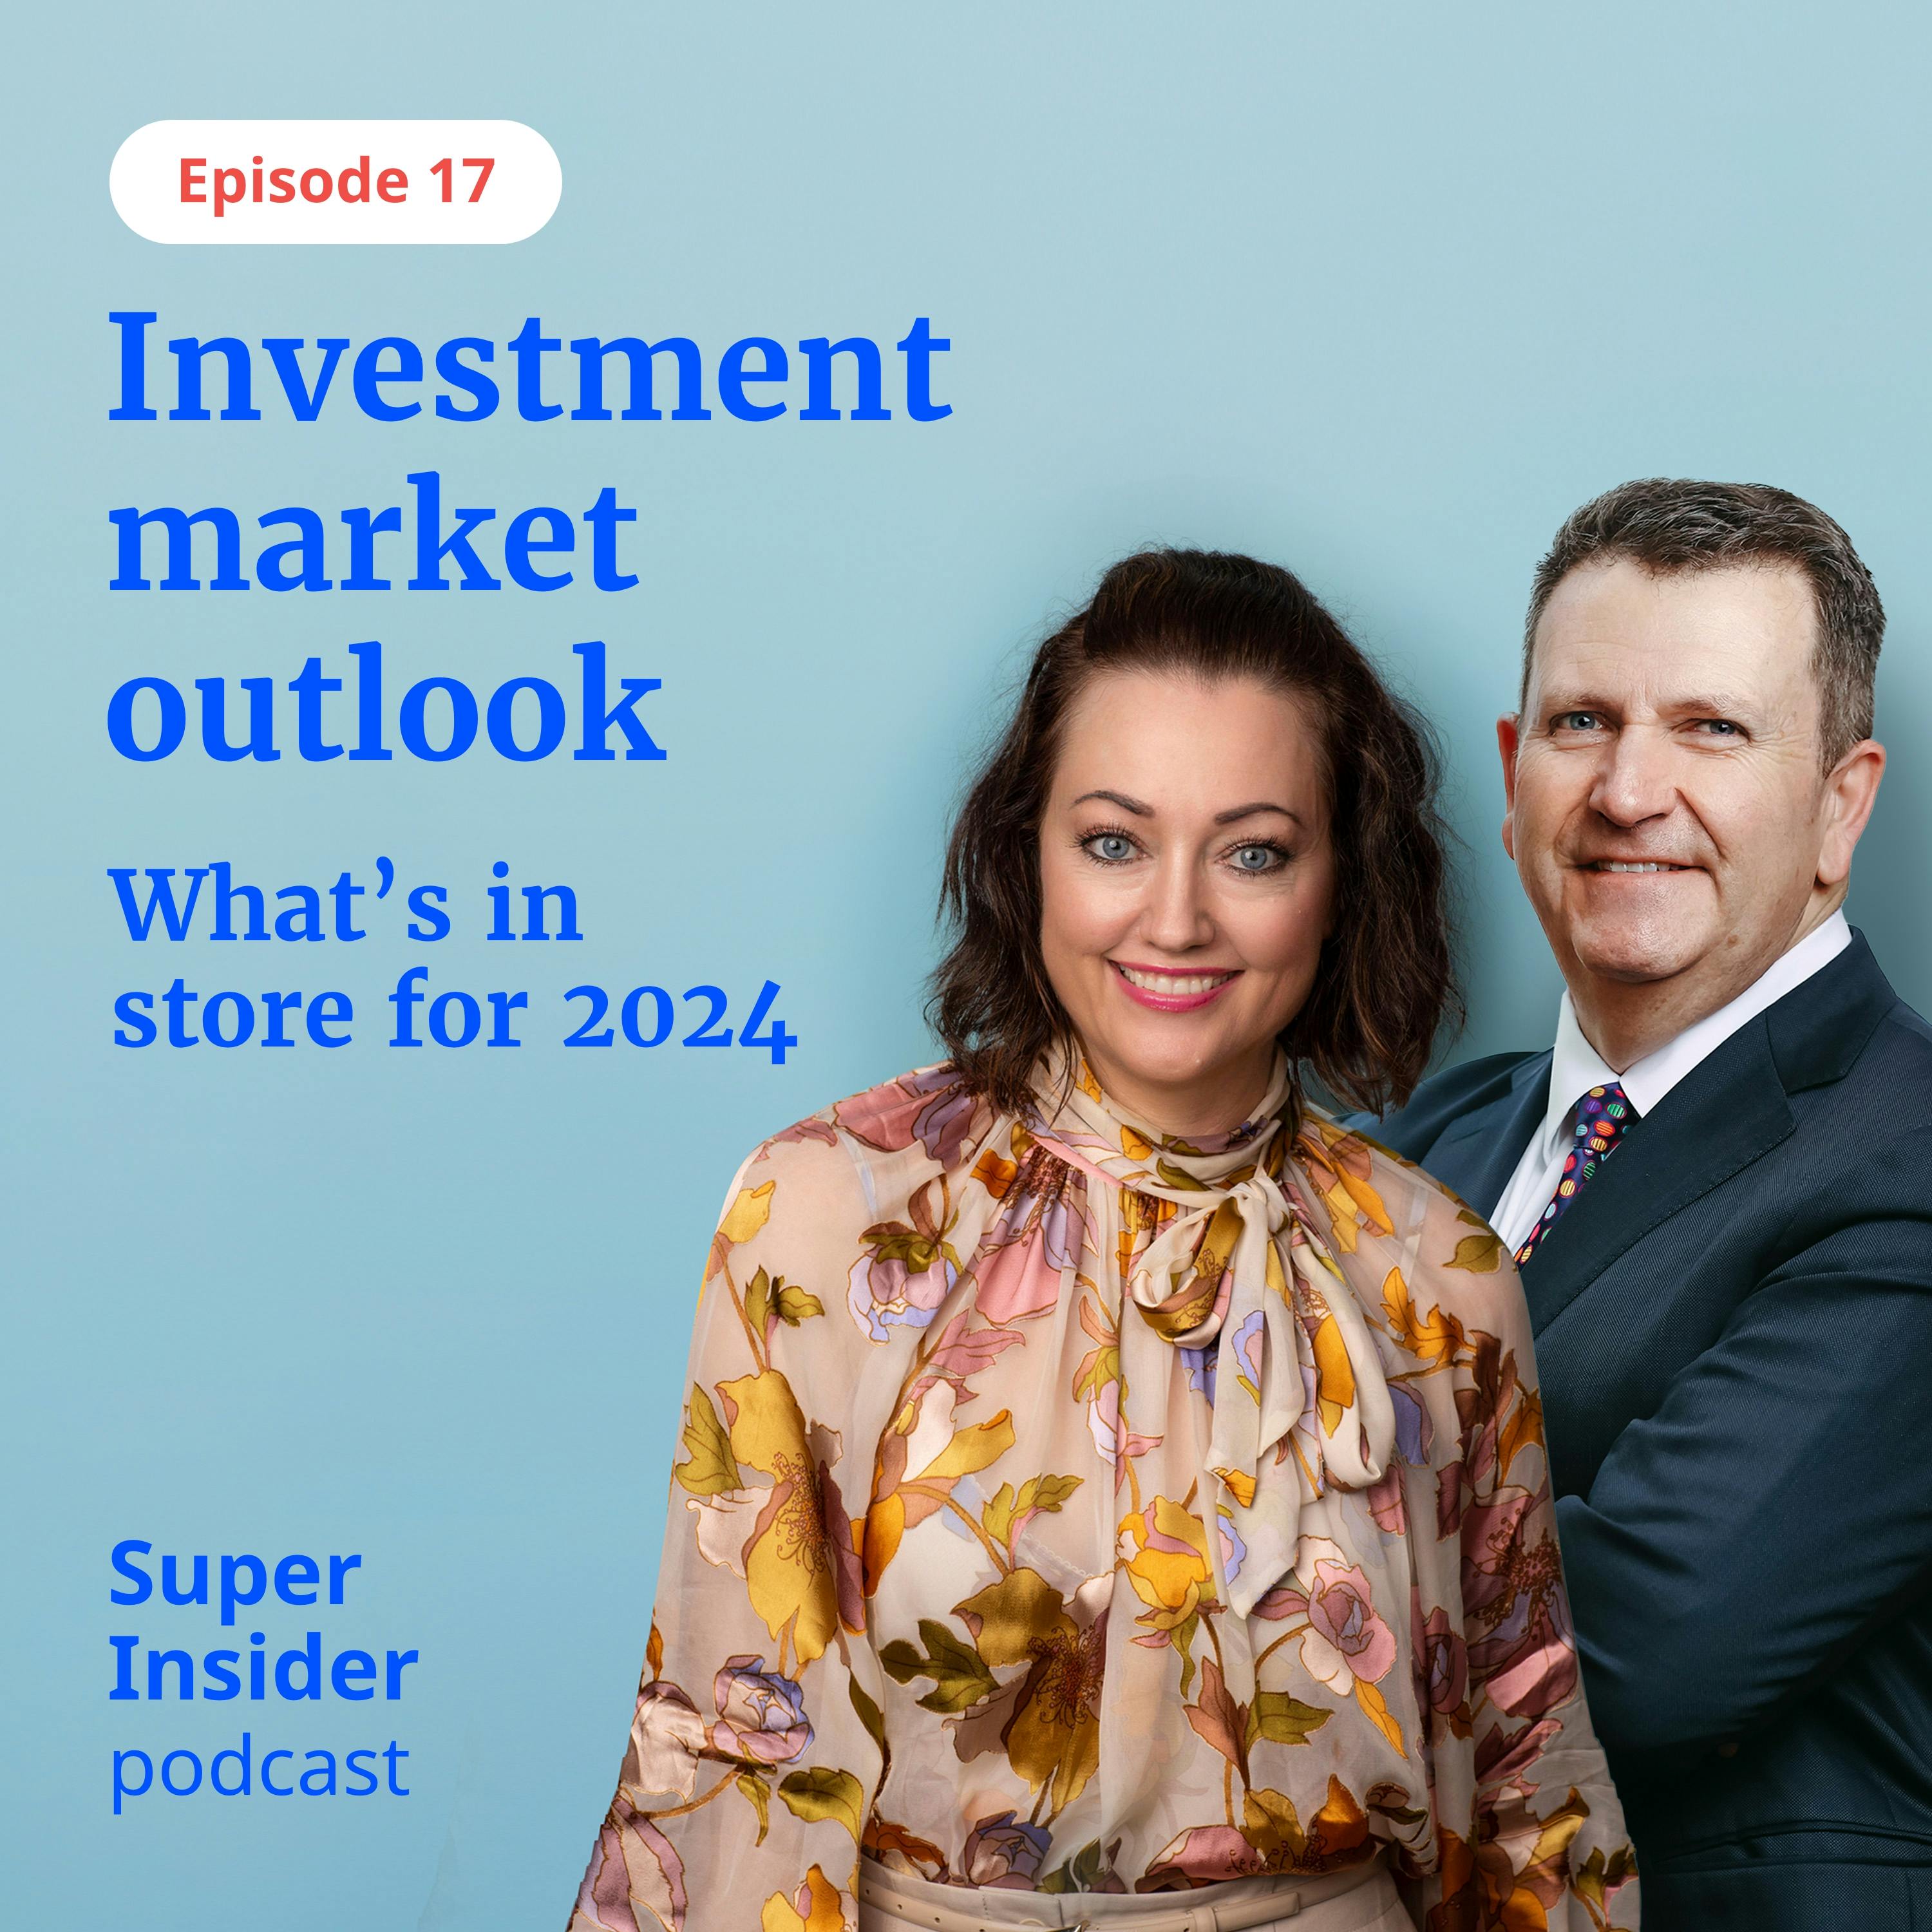 Investment market outlook - what’s in store for 2024